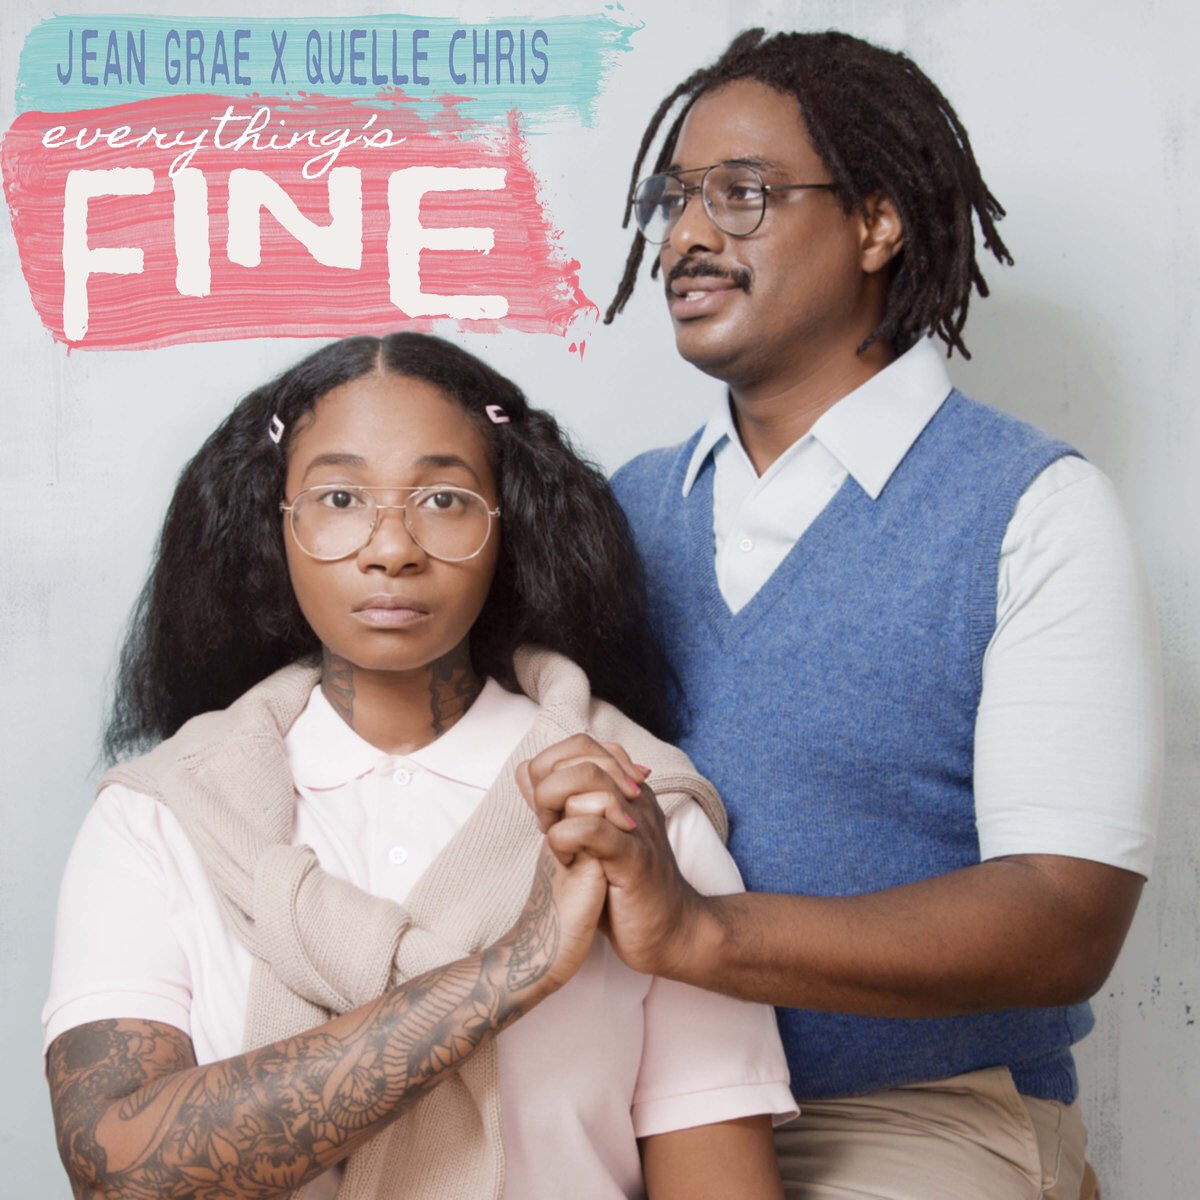 84. Jean Grae & Quelle Chris - Everything’s Fine (2017)Perfectly balanced humour and social commentary, with exceptional chemistry and wit.83. Lori McKenna - The Bird & the Rifle (2016)Beautiful, endearing country/folk music - a charming amount of personality on display.